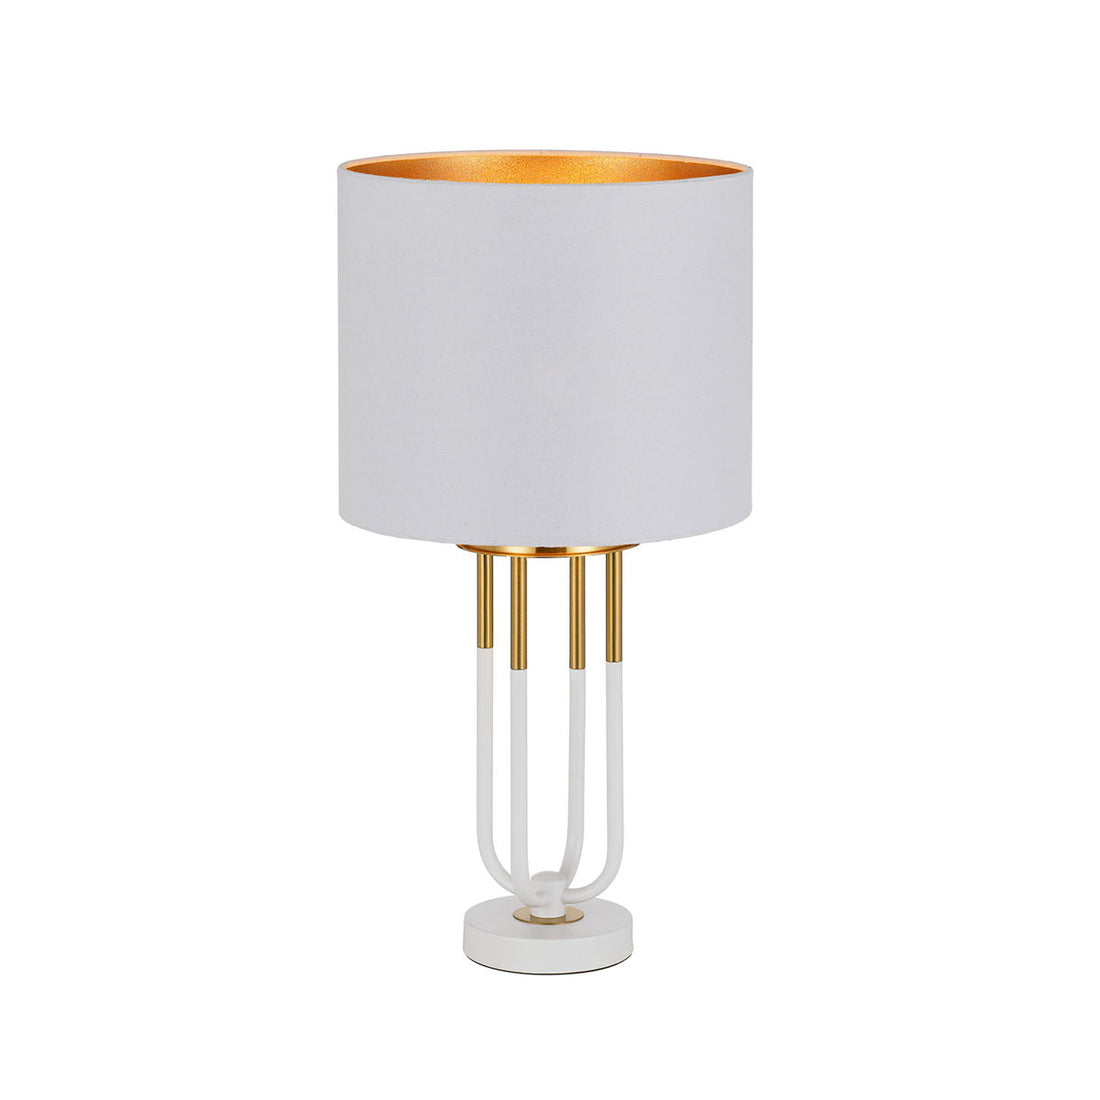 Negas White with Antique Gold Modern Table Lamp